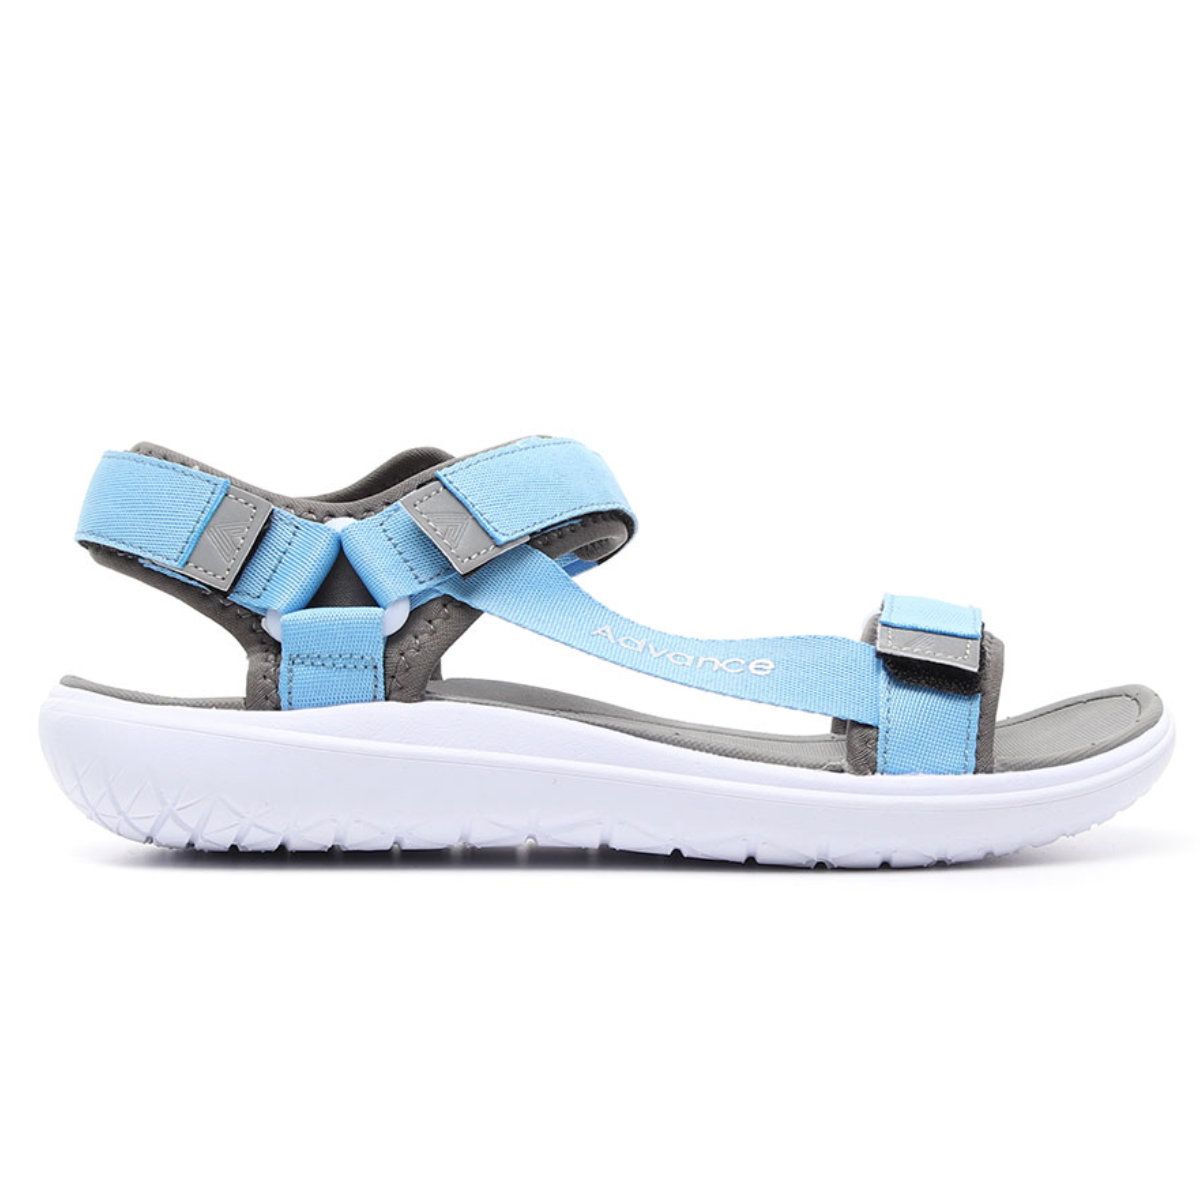 Advance Solstice Womens Sandal | Shop Today. Get it Tomorrow ...